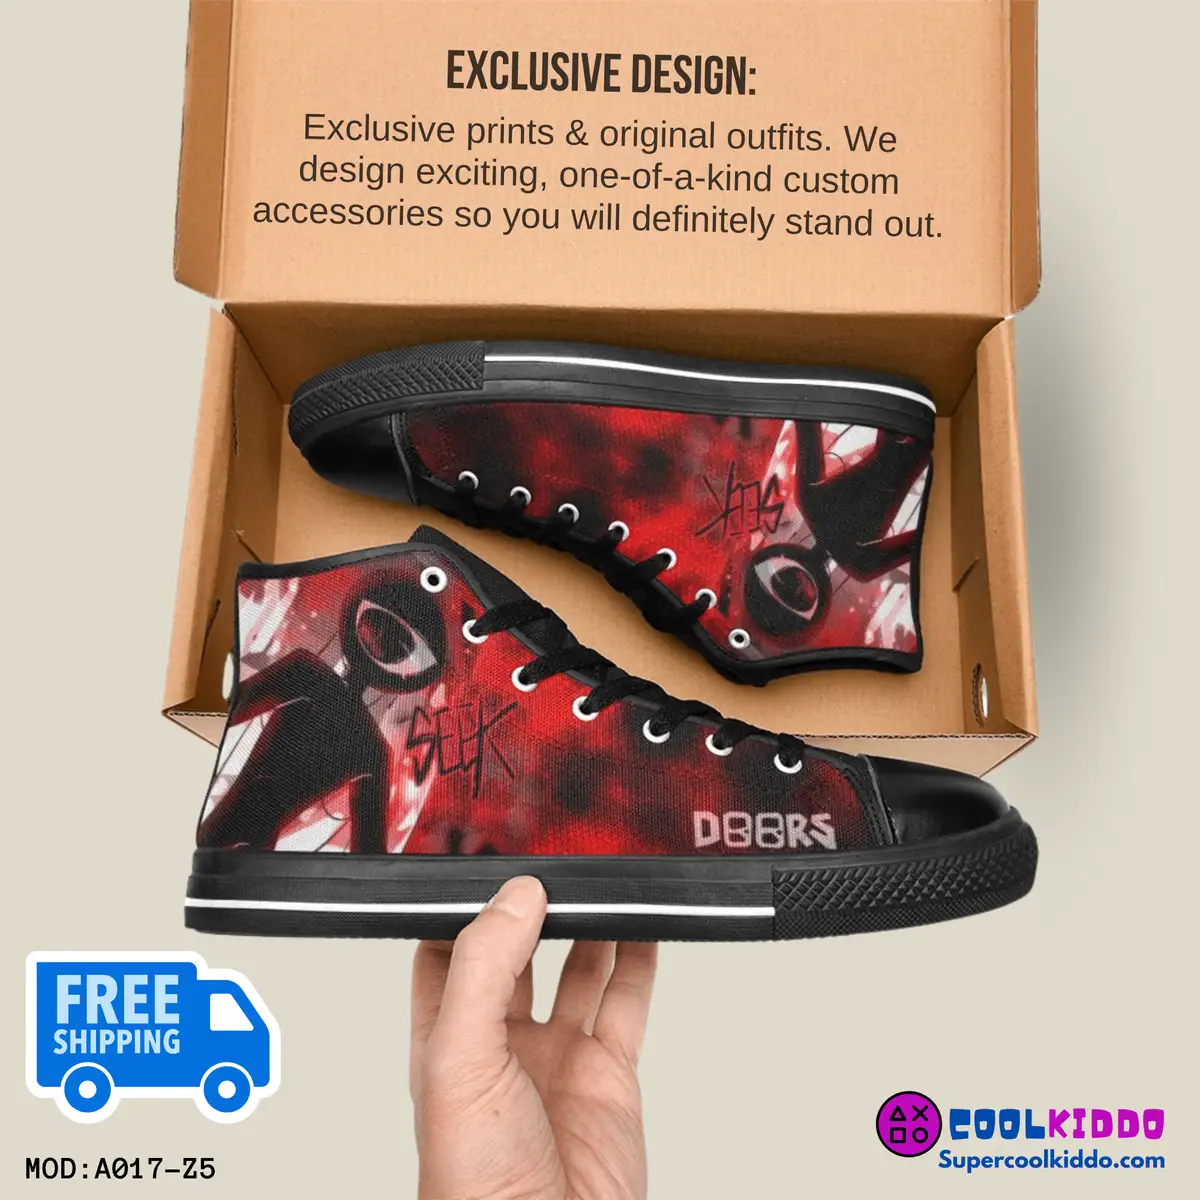 Roblox Doors Inspired High Top Shoes for Kids/Youth – “Seek” Character Print. High-Top Sneakers Cool Kiddo 20